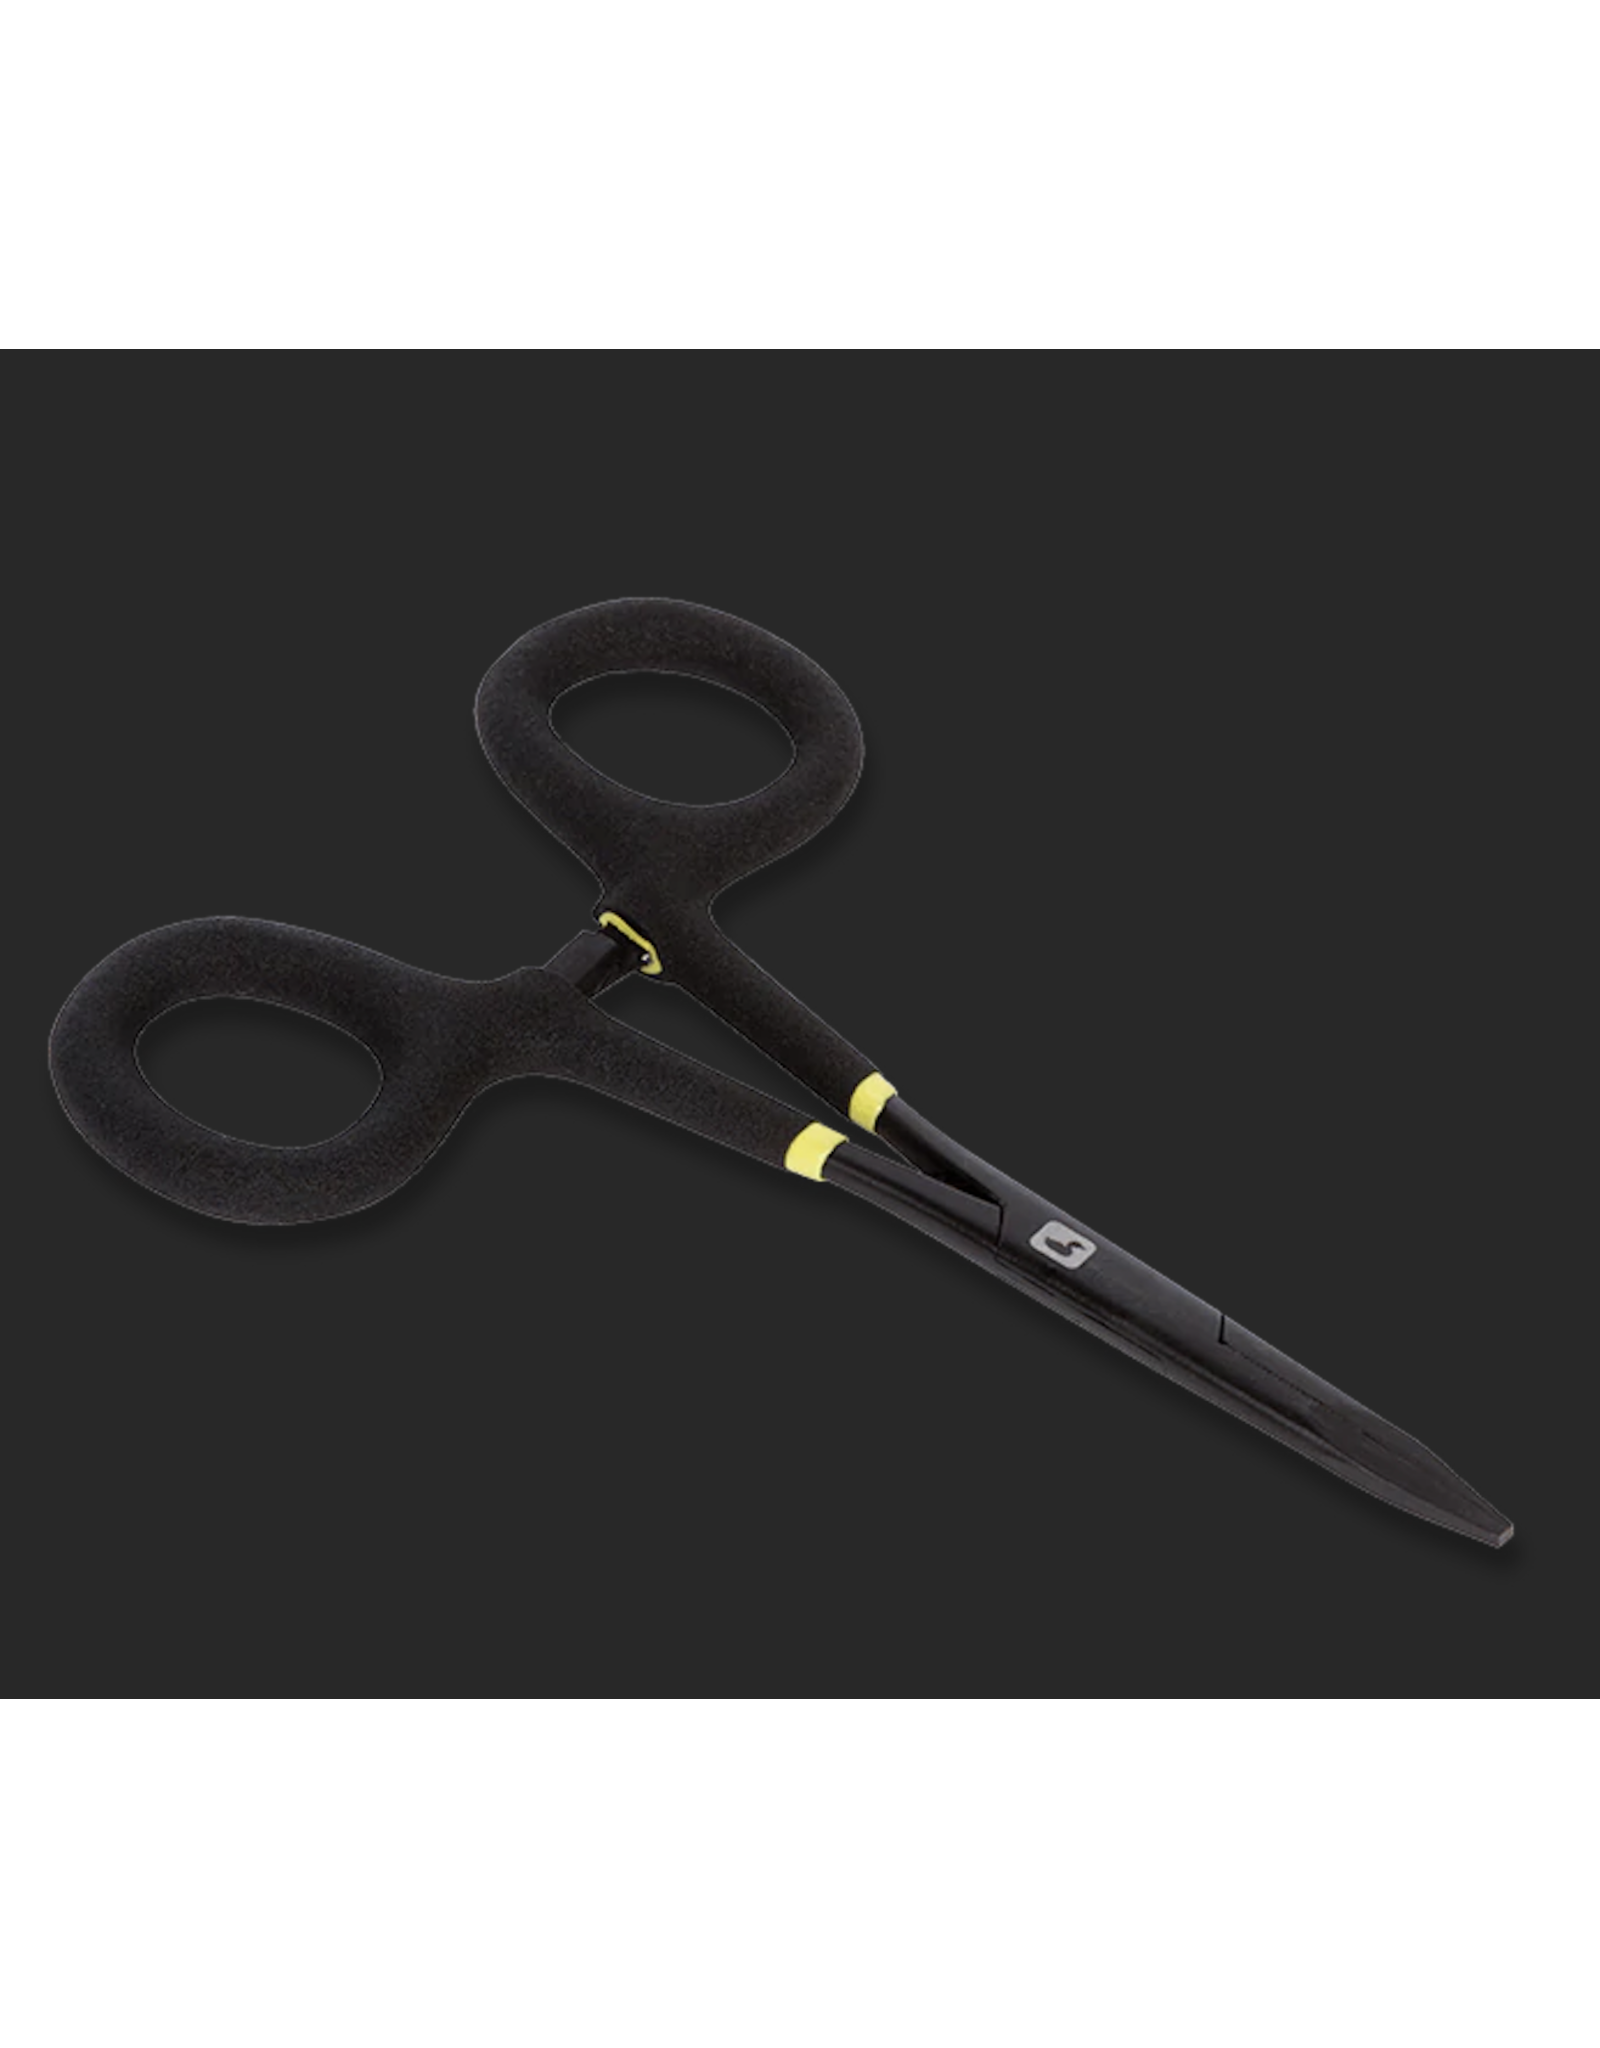 Loon Rogue Forceps